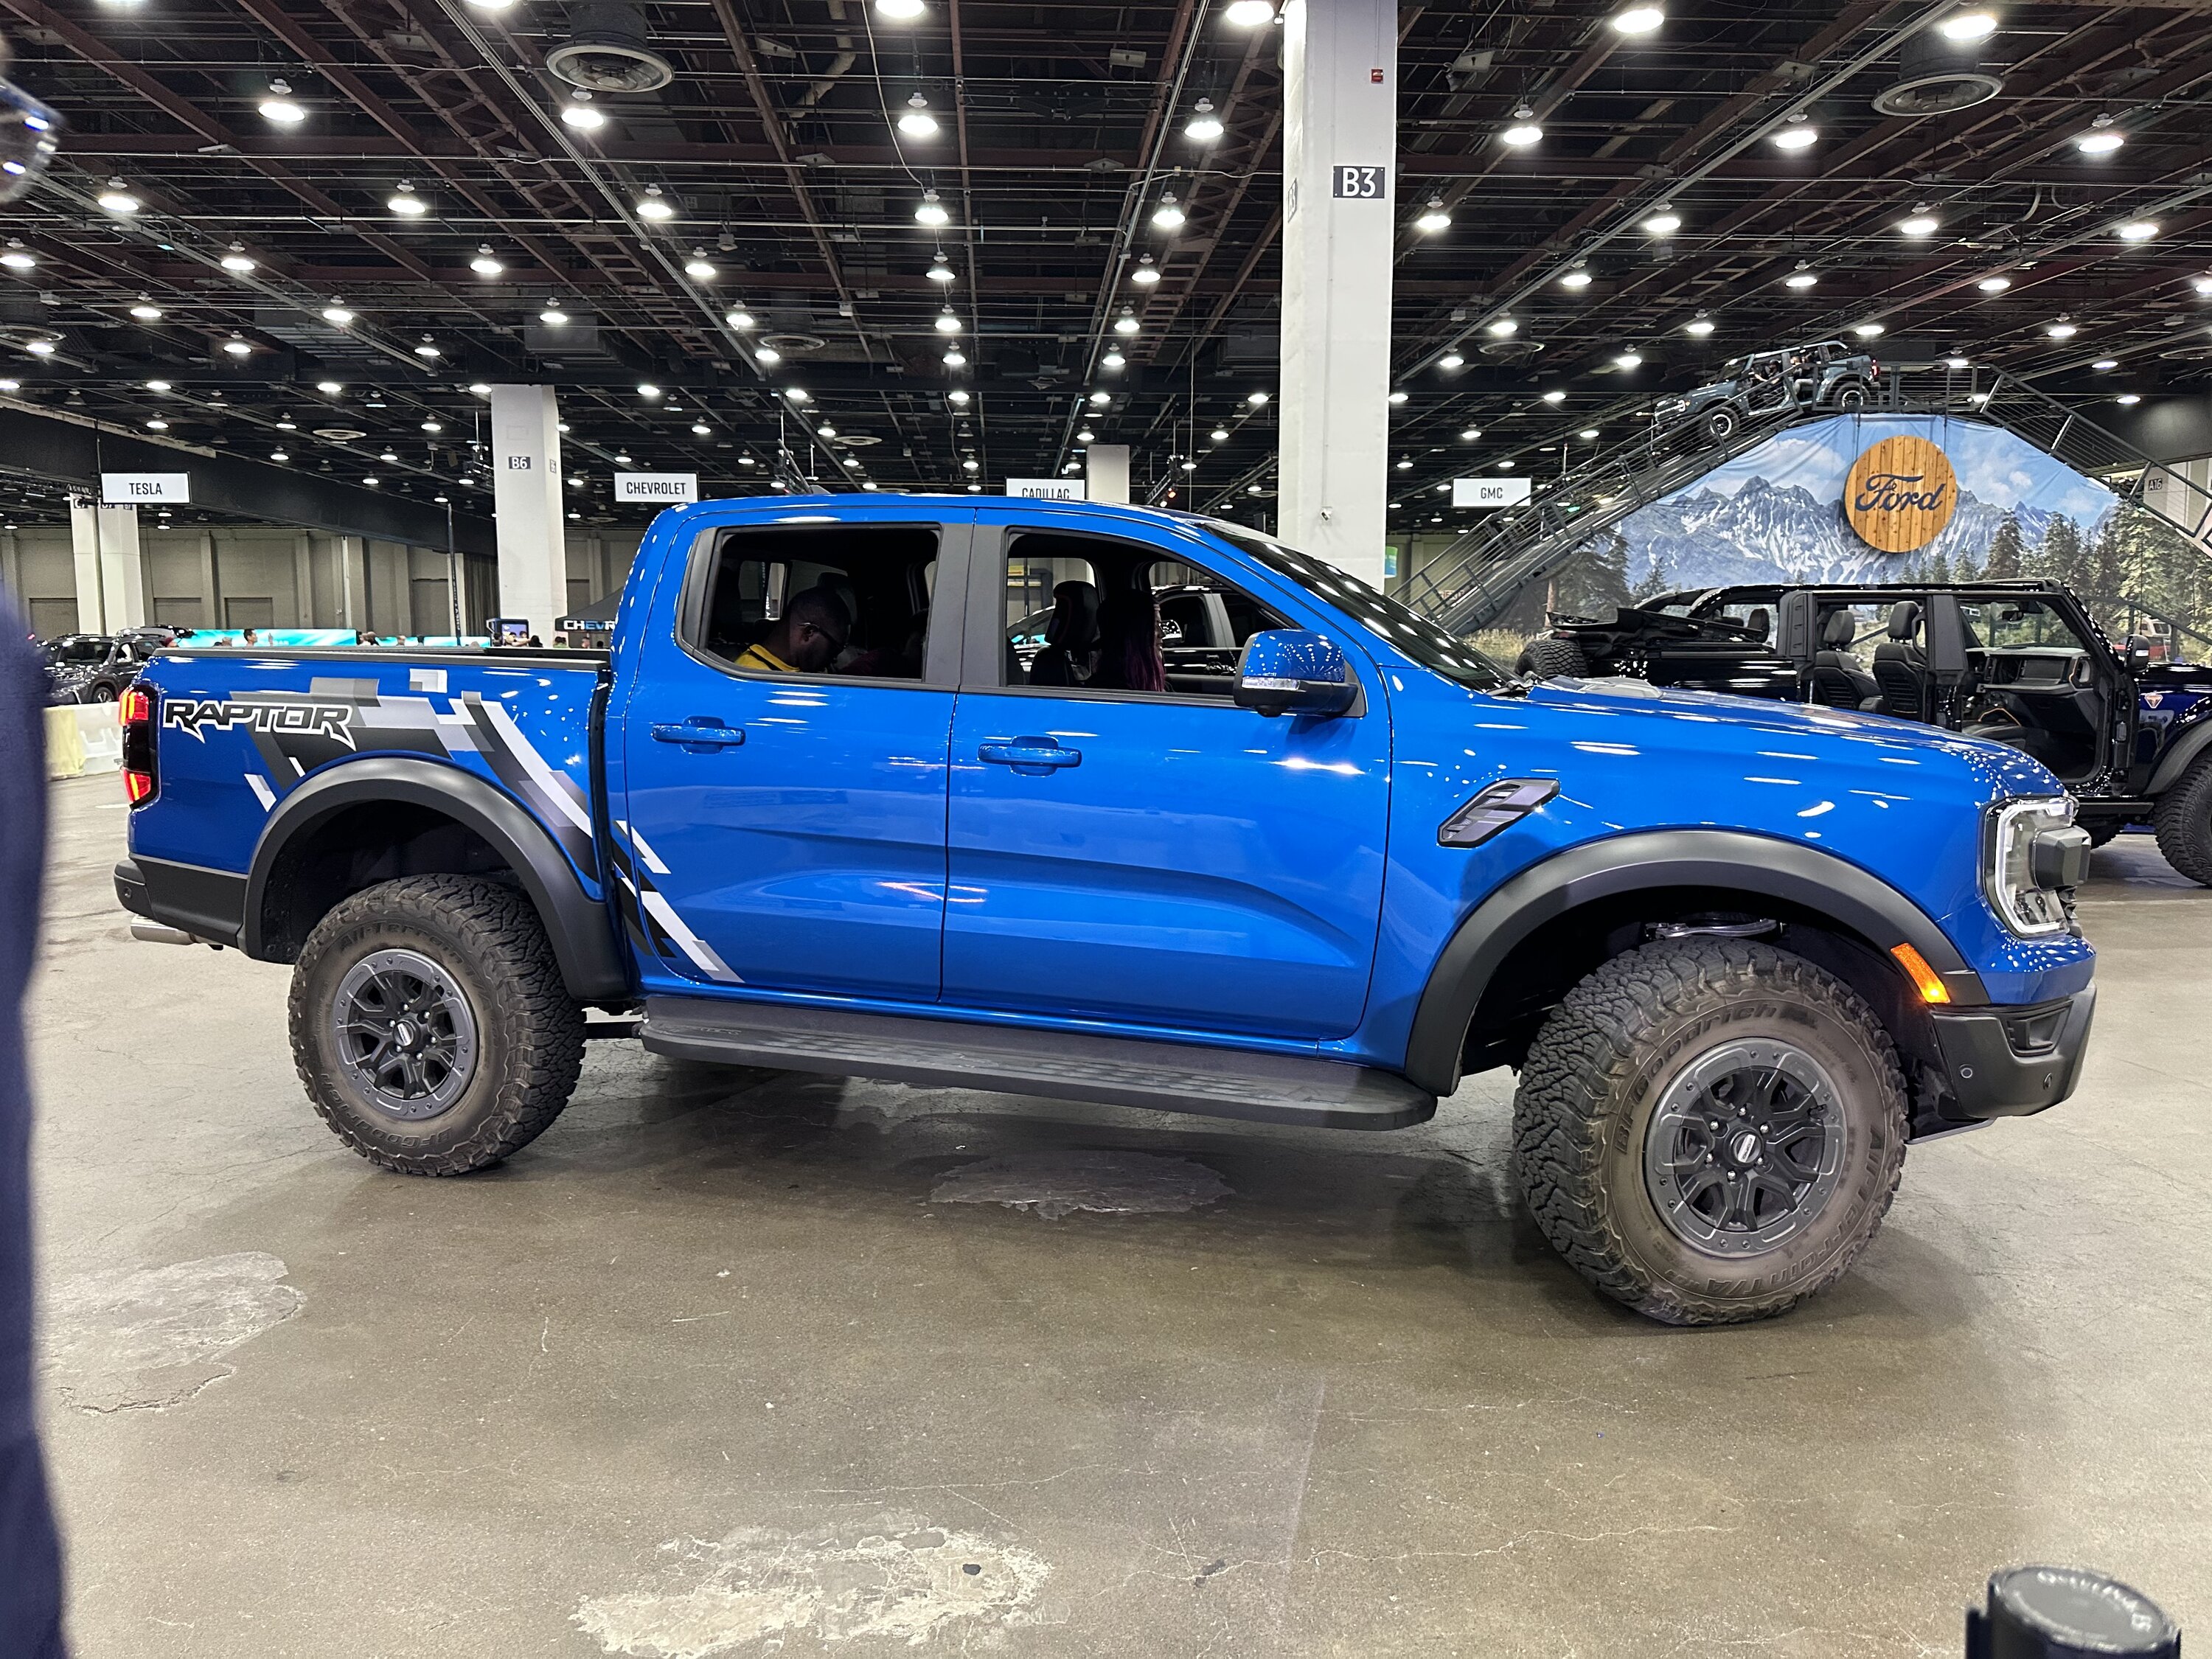 Ford Ranger 2024 Ranger Raptor is 110% worth the money... my impressions from impromptu visit to Detroit Autoshow 9CE861BE-F751-416F-82BA-3F864E3DC9D1